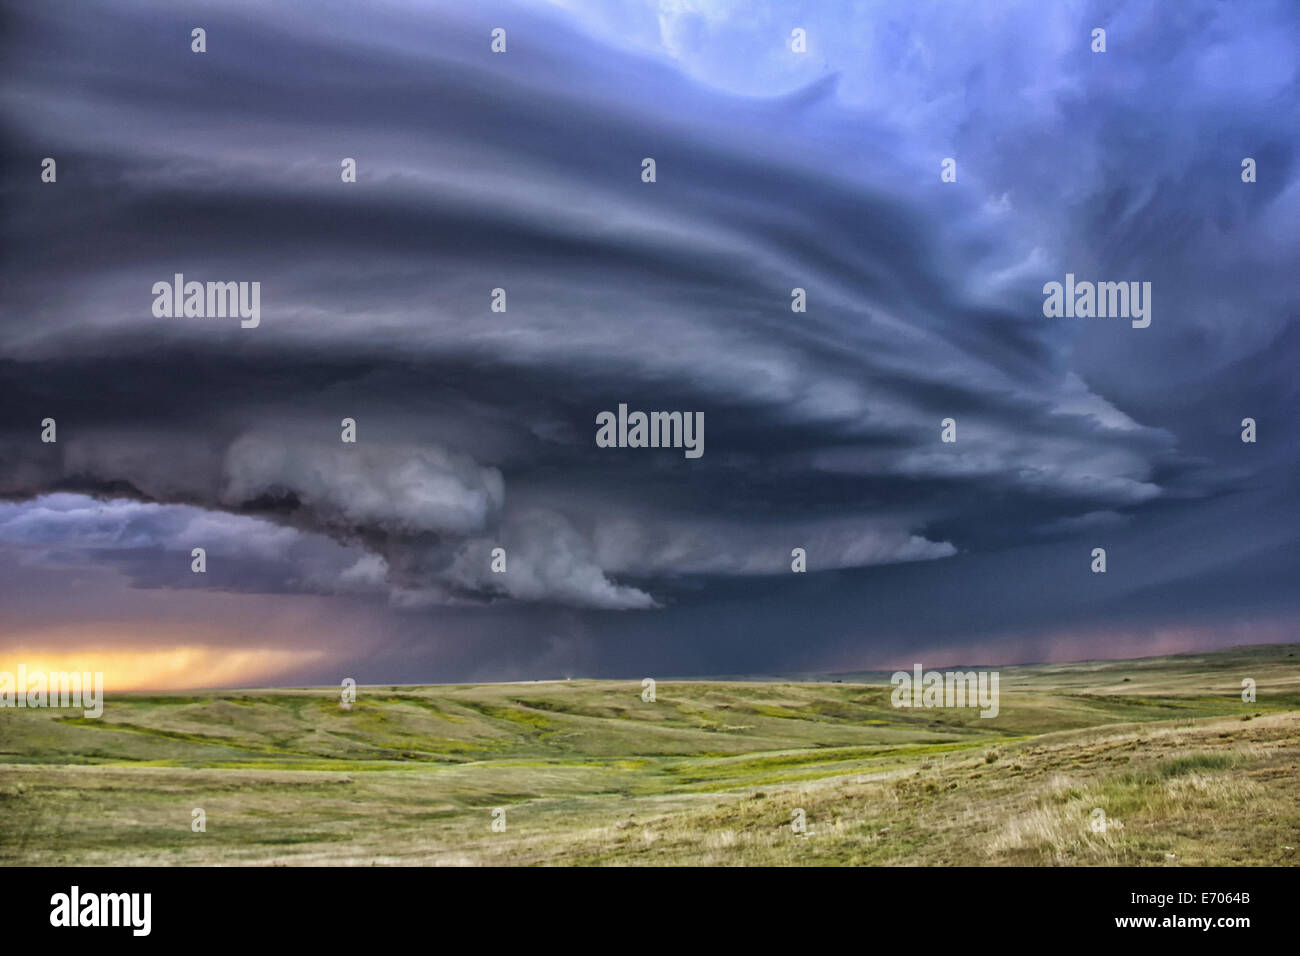 Anticyclonic supercell thunderstorm over the plains, Deer Trail, Colorado, USA Stock Photo